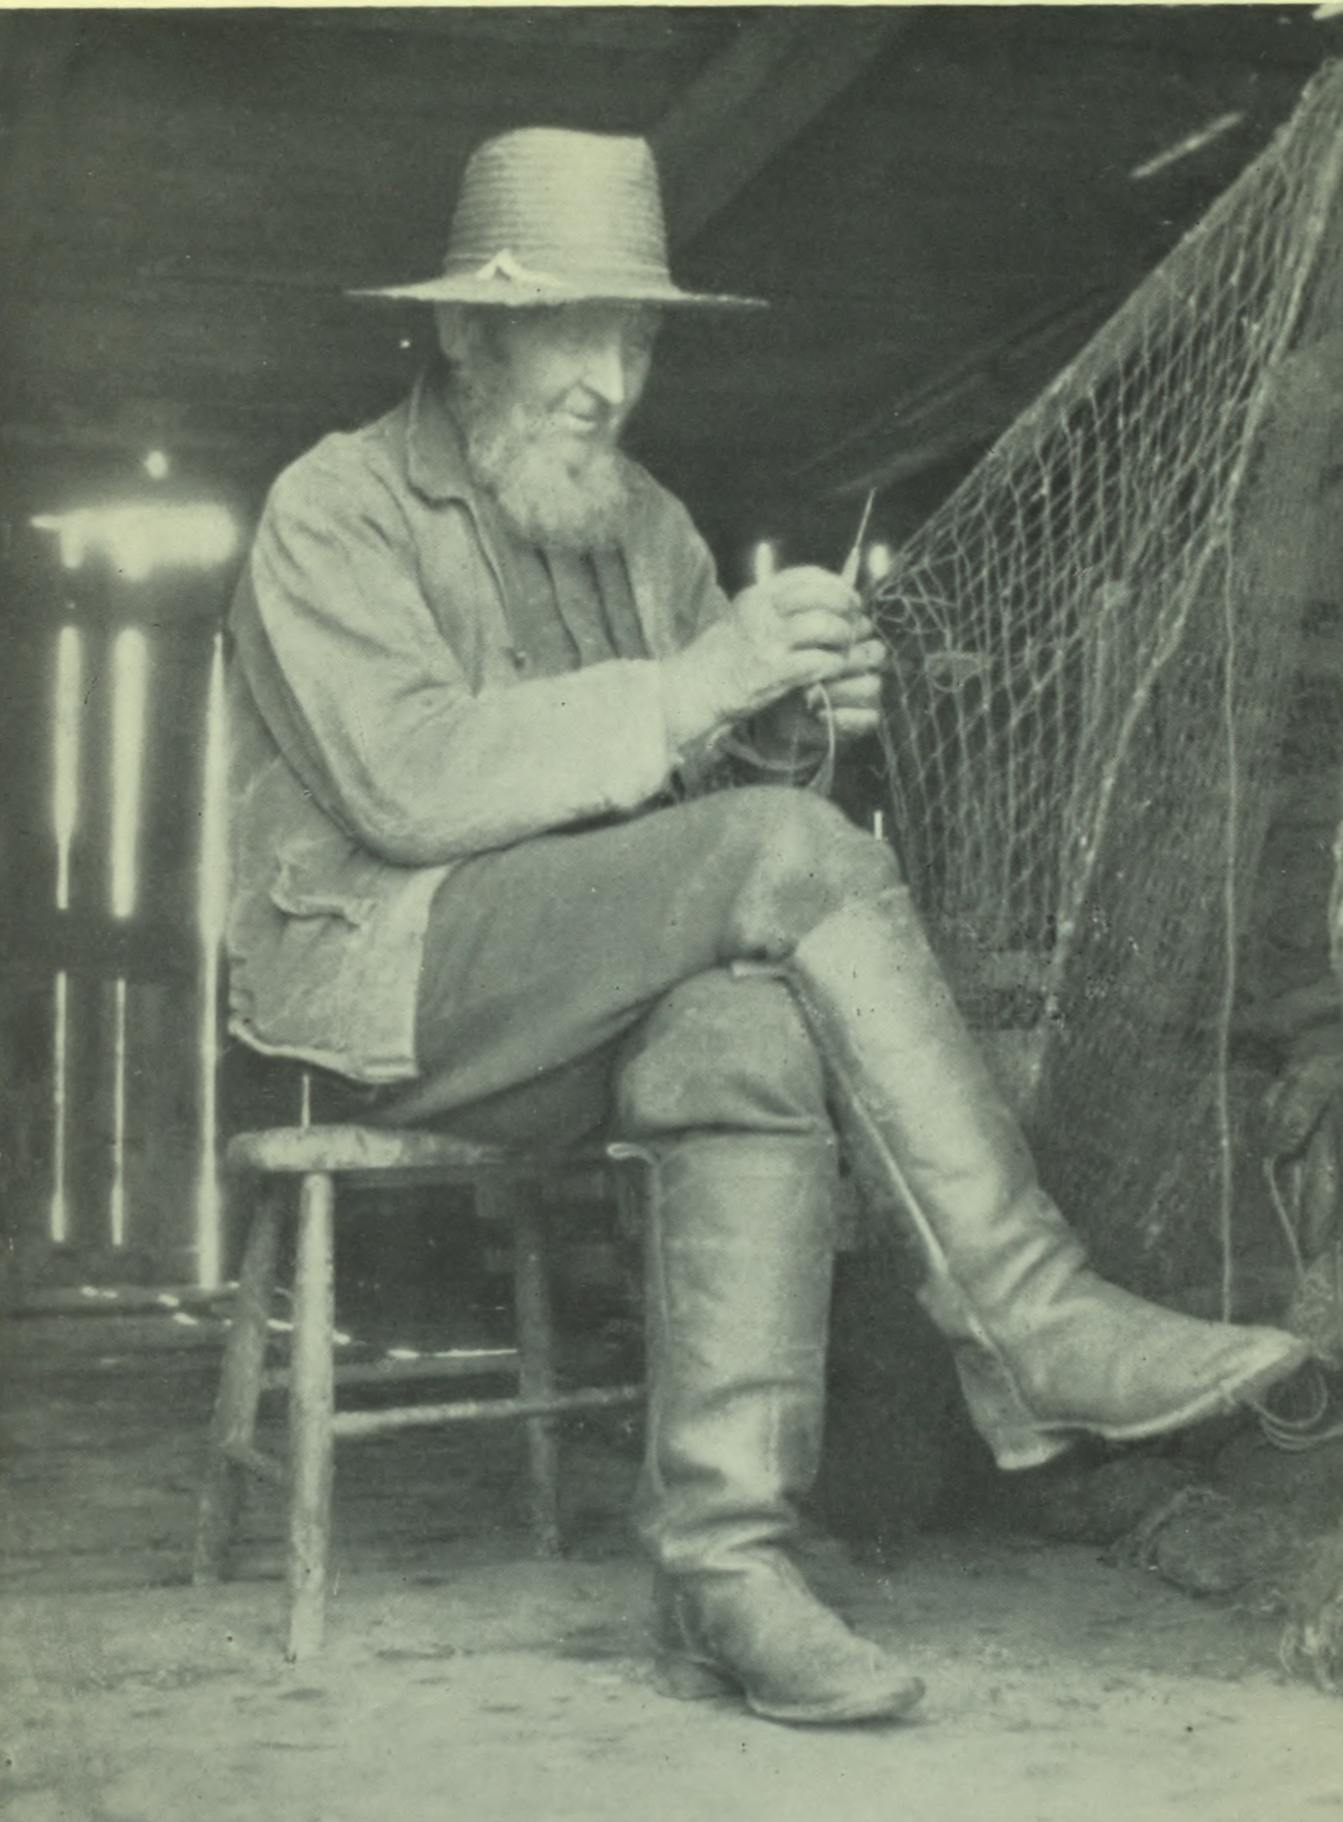 Man in a straw hat and fishing boots focused on the task at hand.